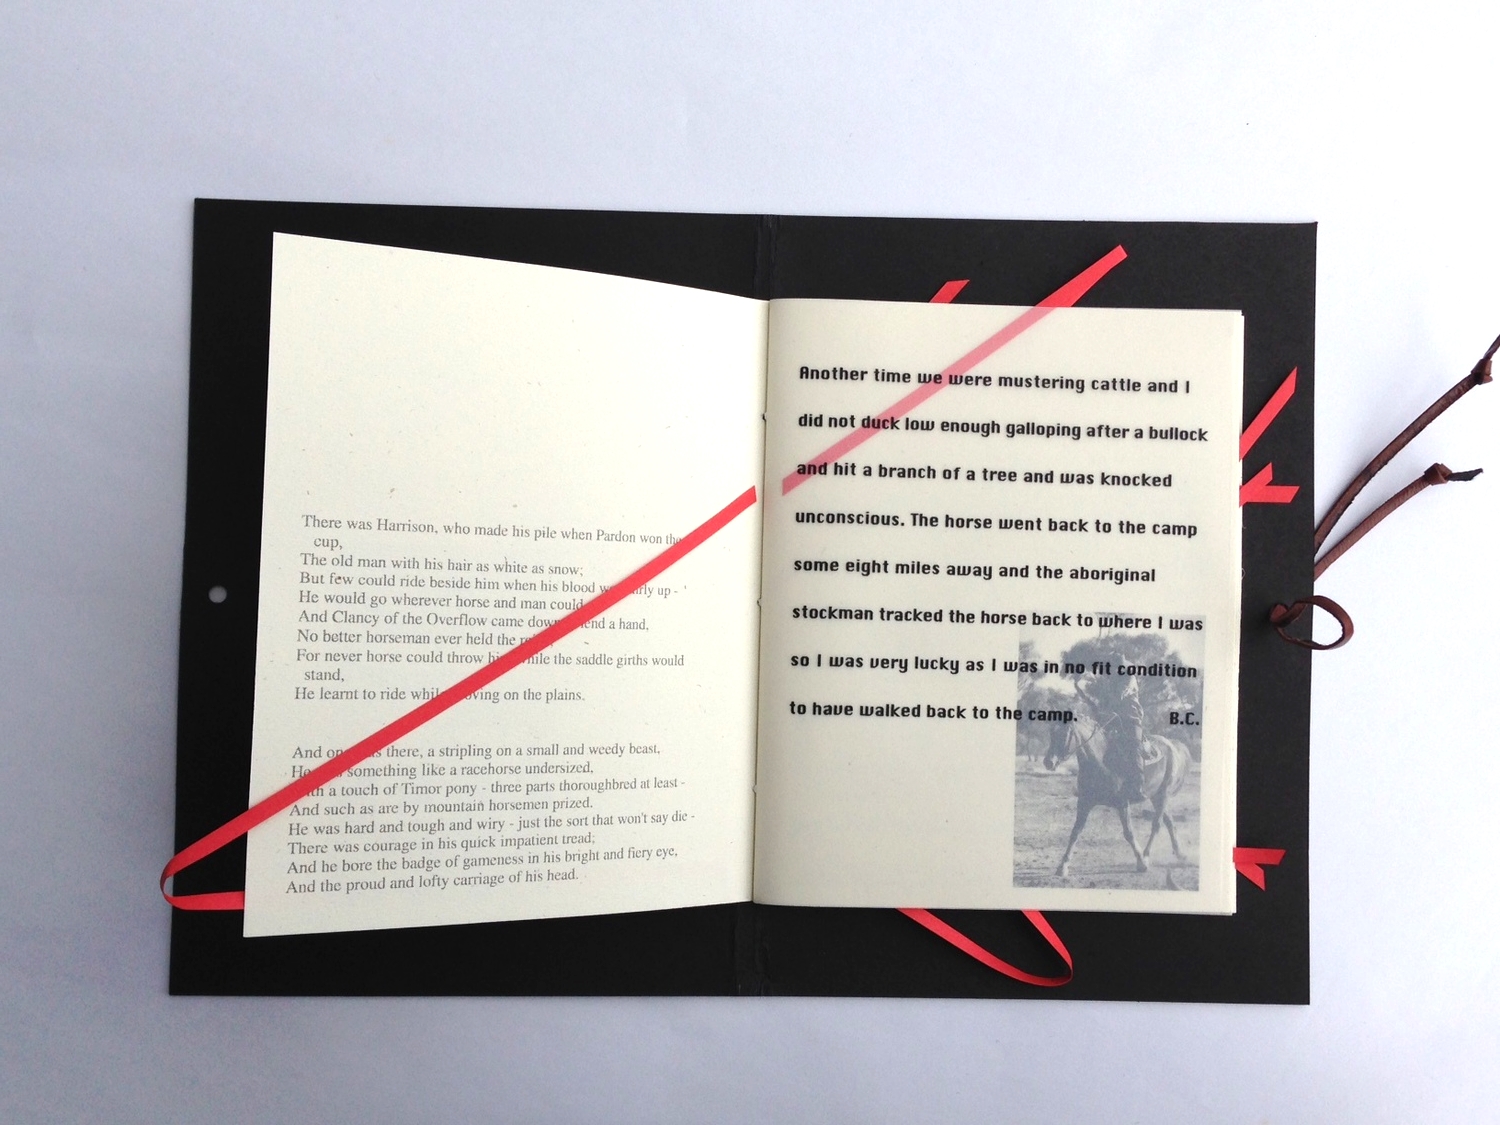    The Man From Snowy River - Revisited. &nbsp; Artists Book. 2000&nbsp; ©&nbsp; Ida Montague  The red line in and out through the pages illustrates the 'The Ride' as described in A.B. Patterson's poem of the same title. 